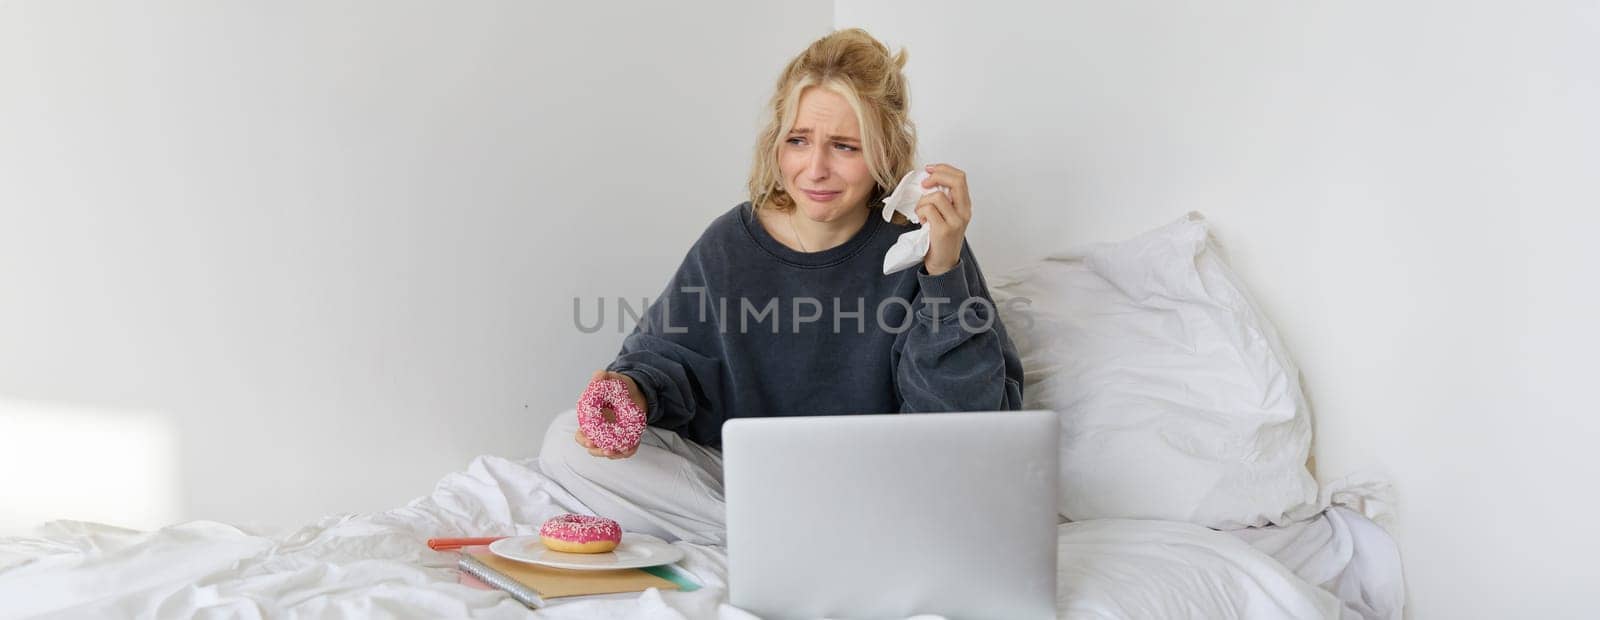 Portrait of woman sitting on a bed with laptop, eating doughnut and crying from sad movie scene.